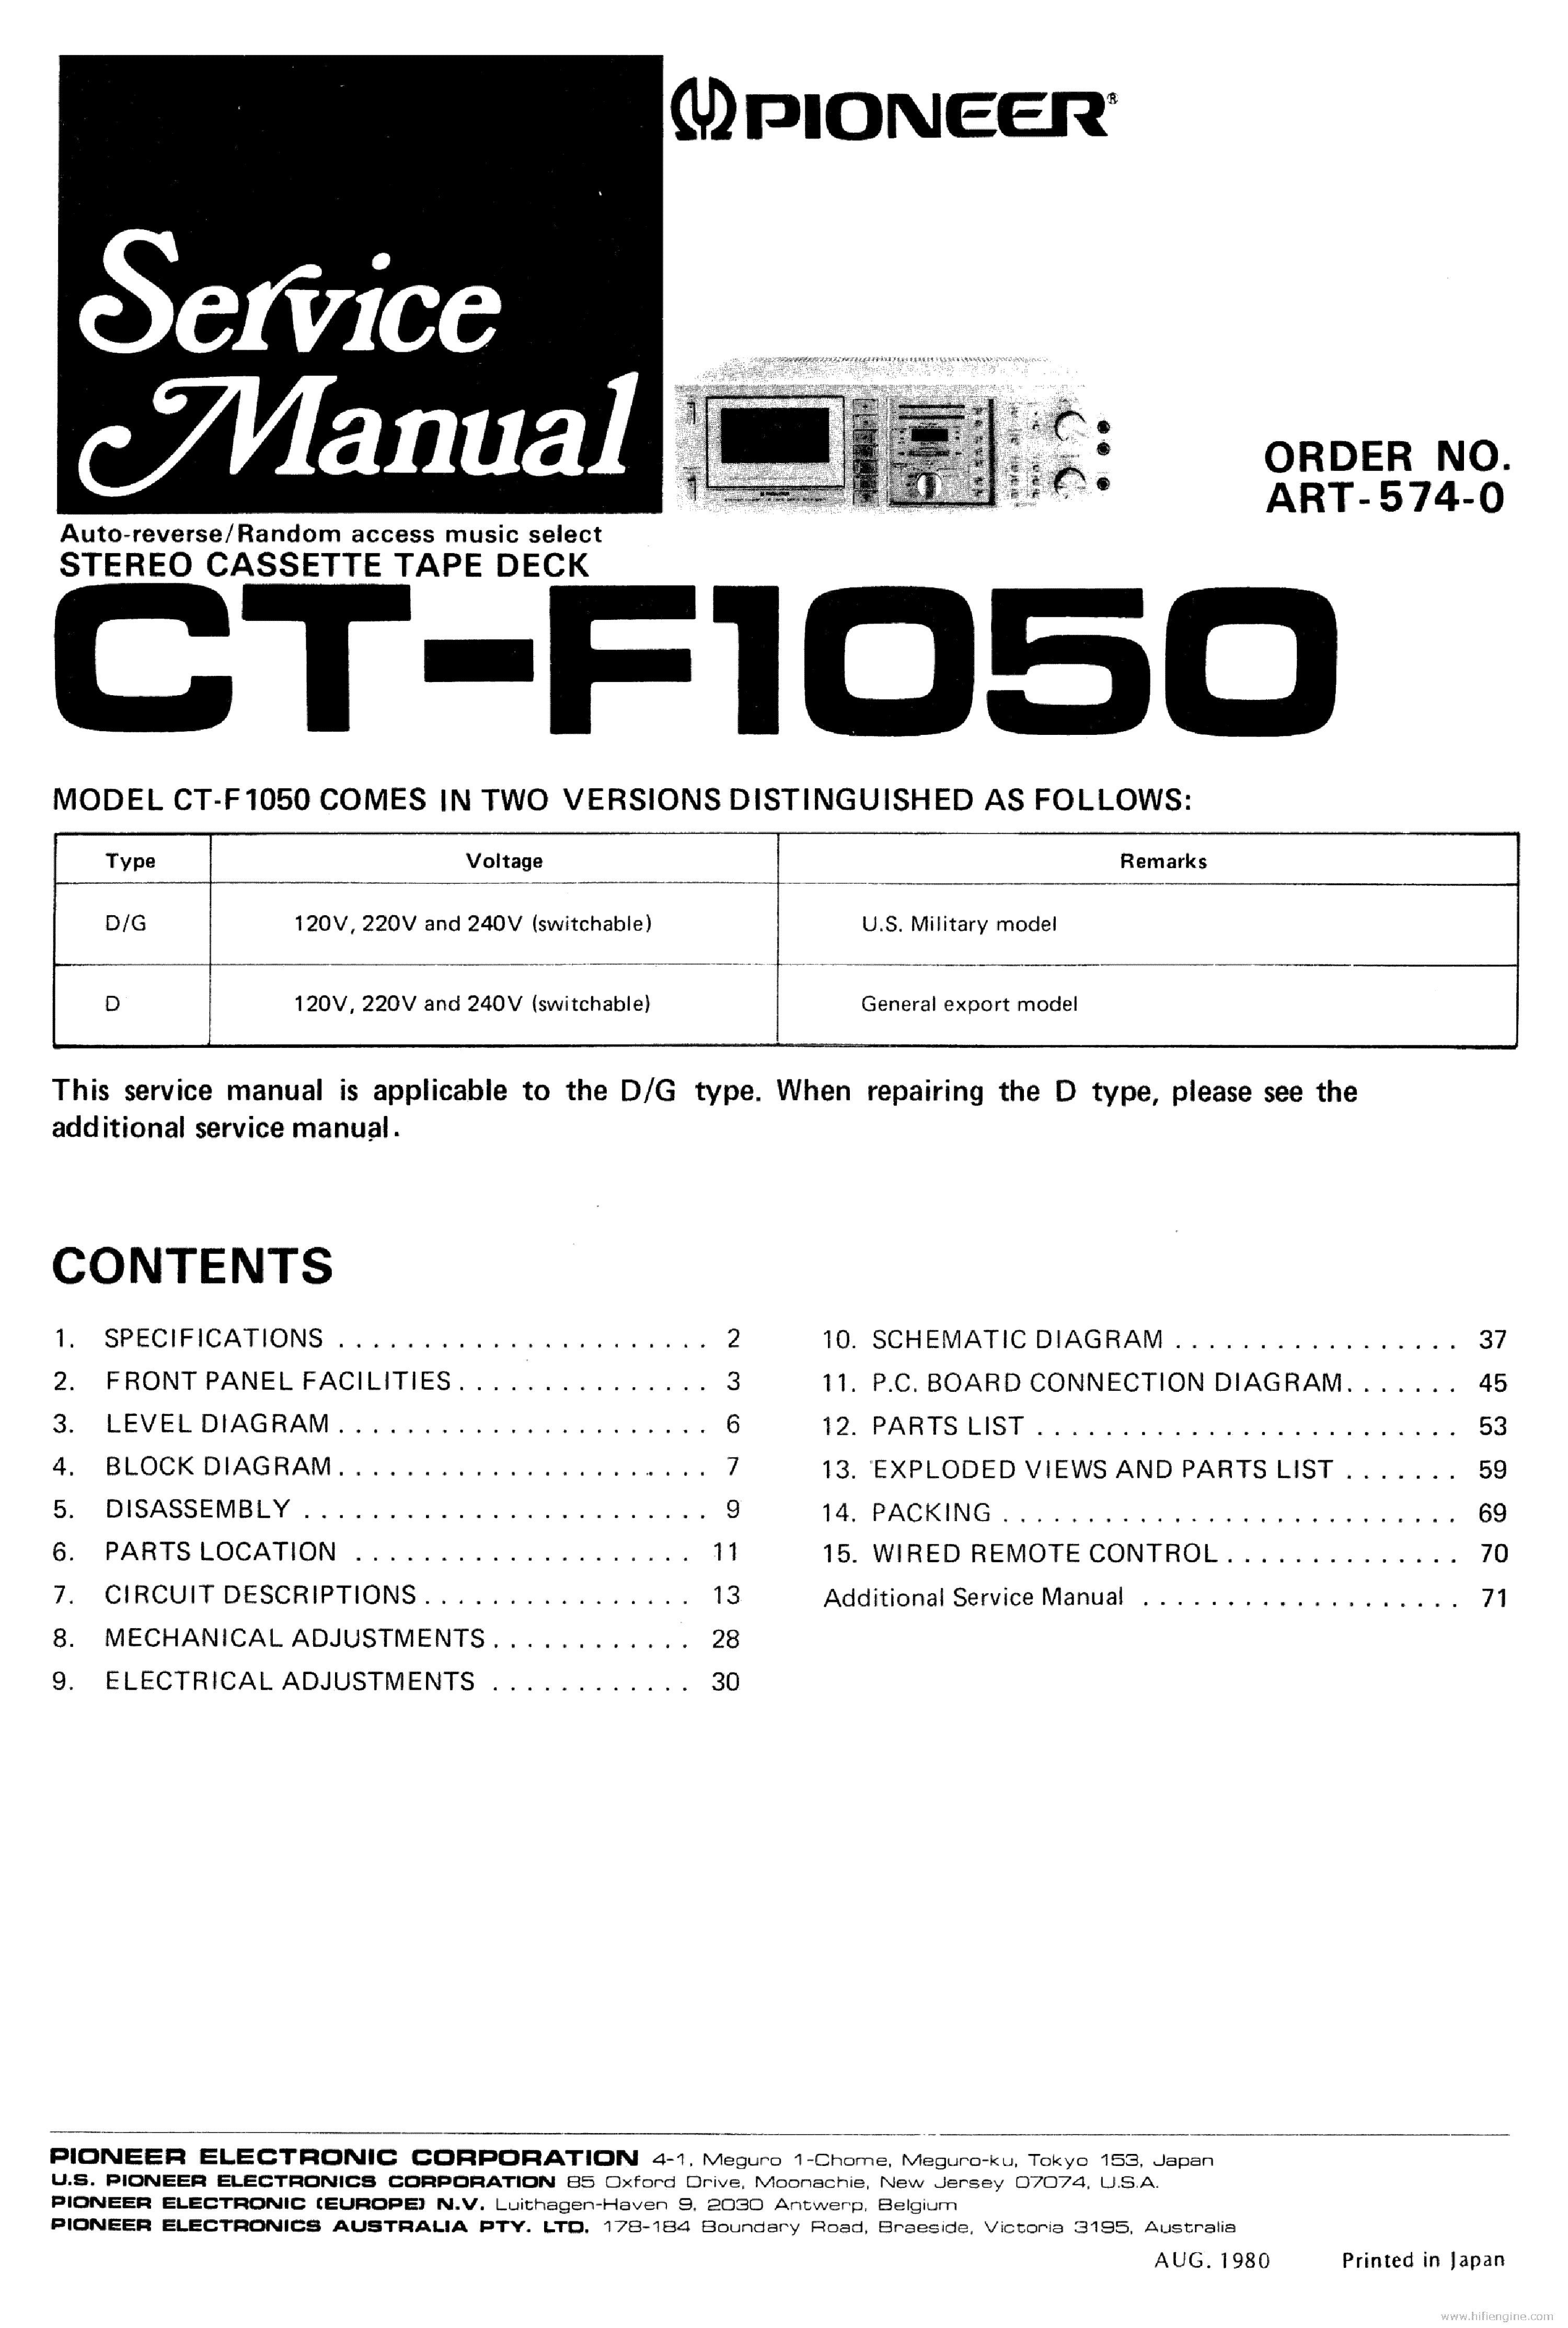 PIONEER CT-F1050 ART5740 service manual (1st page)